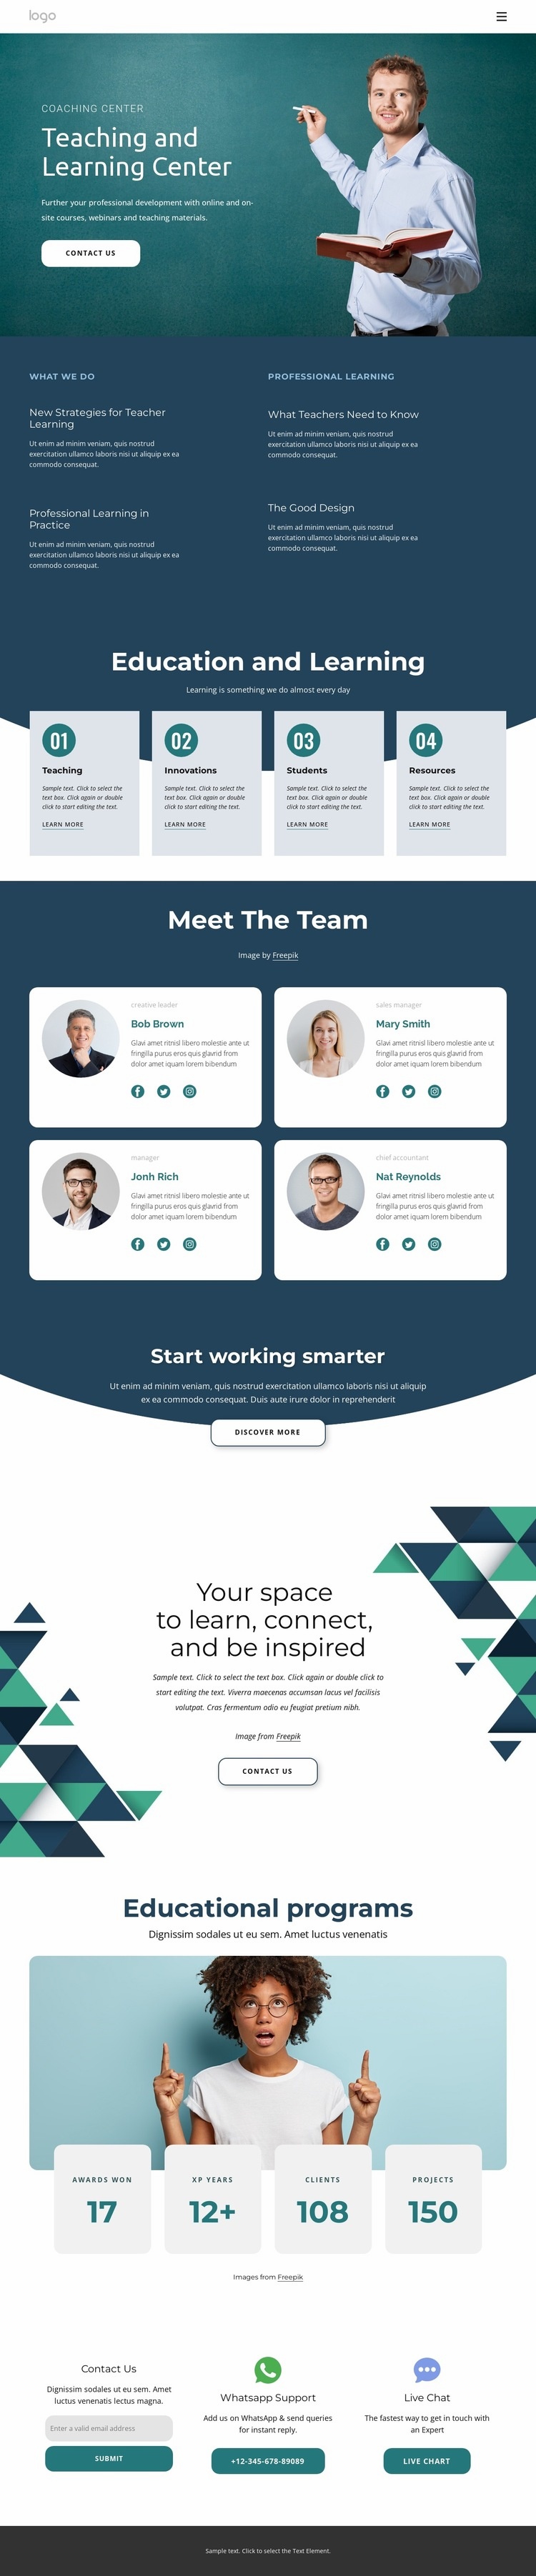 Teaching and learning center Wix Template Alternative